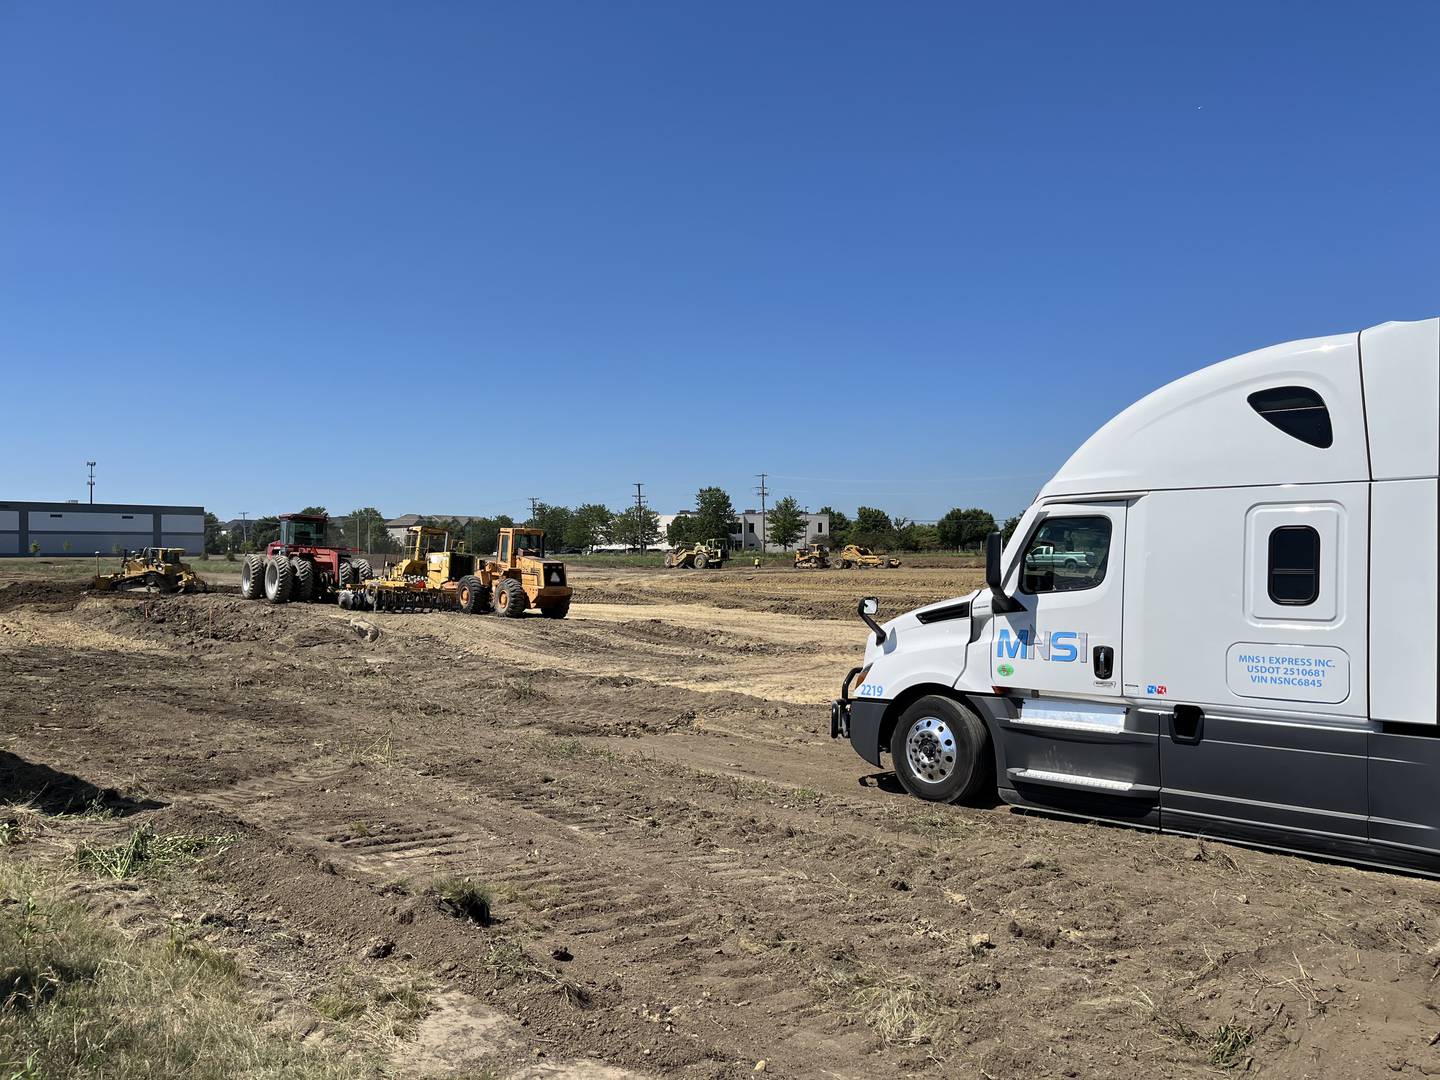 An MNS1 Express truck tractor at the site for the new location for MNS1 Express in Plainfield on Thursday, July 14, 2022.